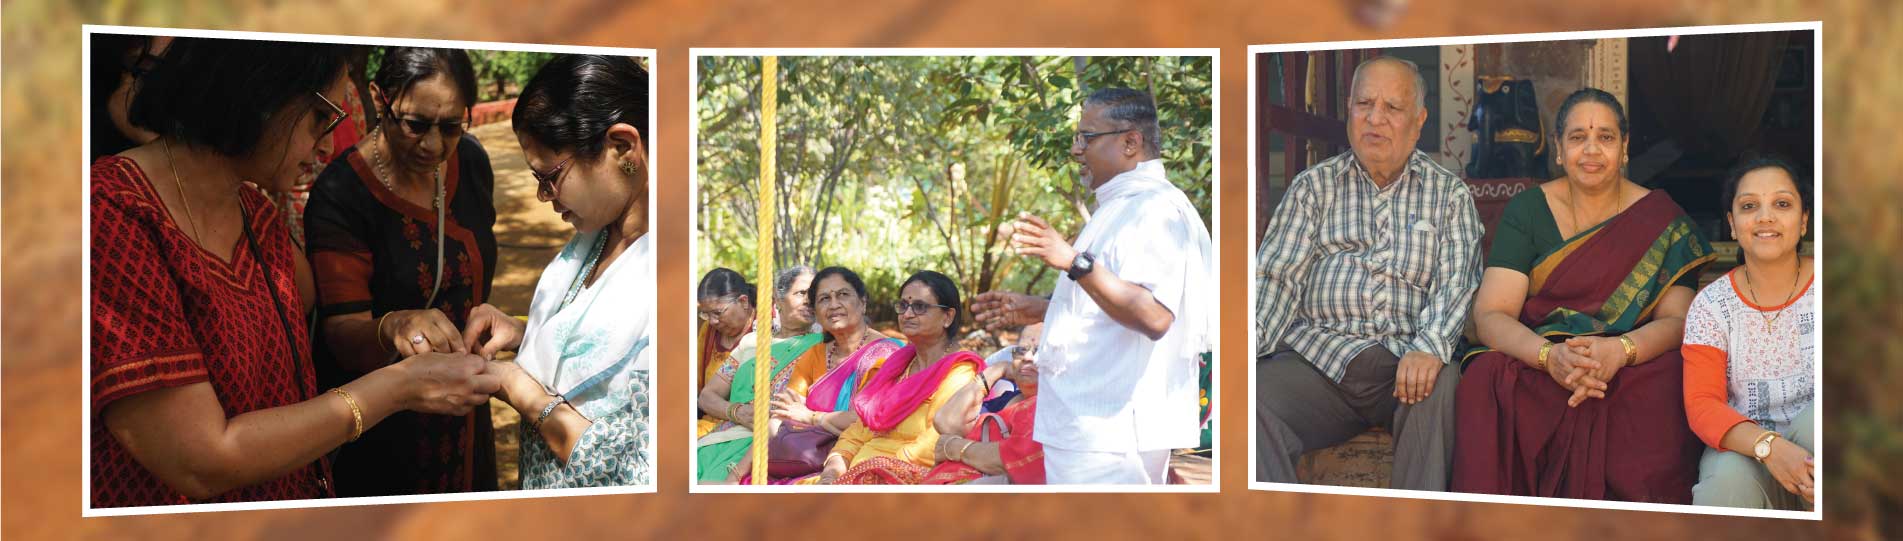 Senior Citizens Outing in Bangalore